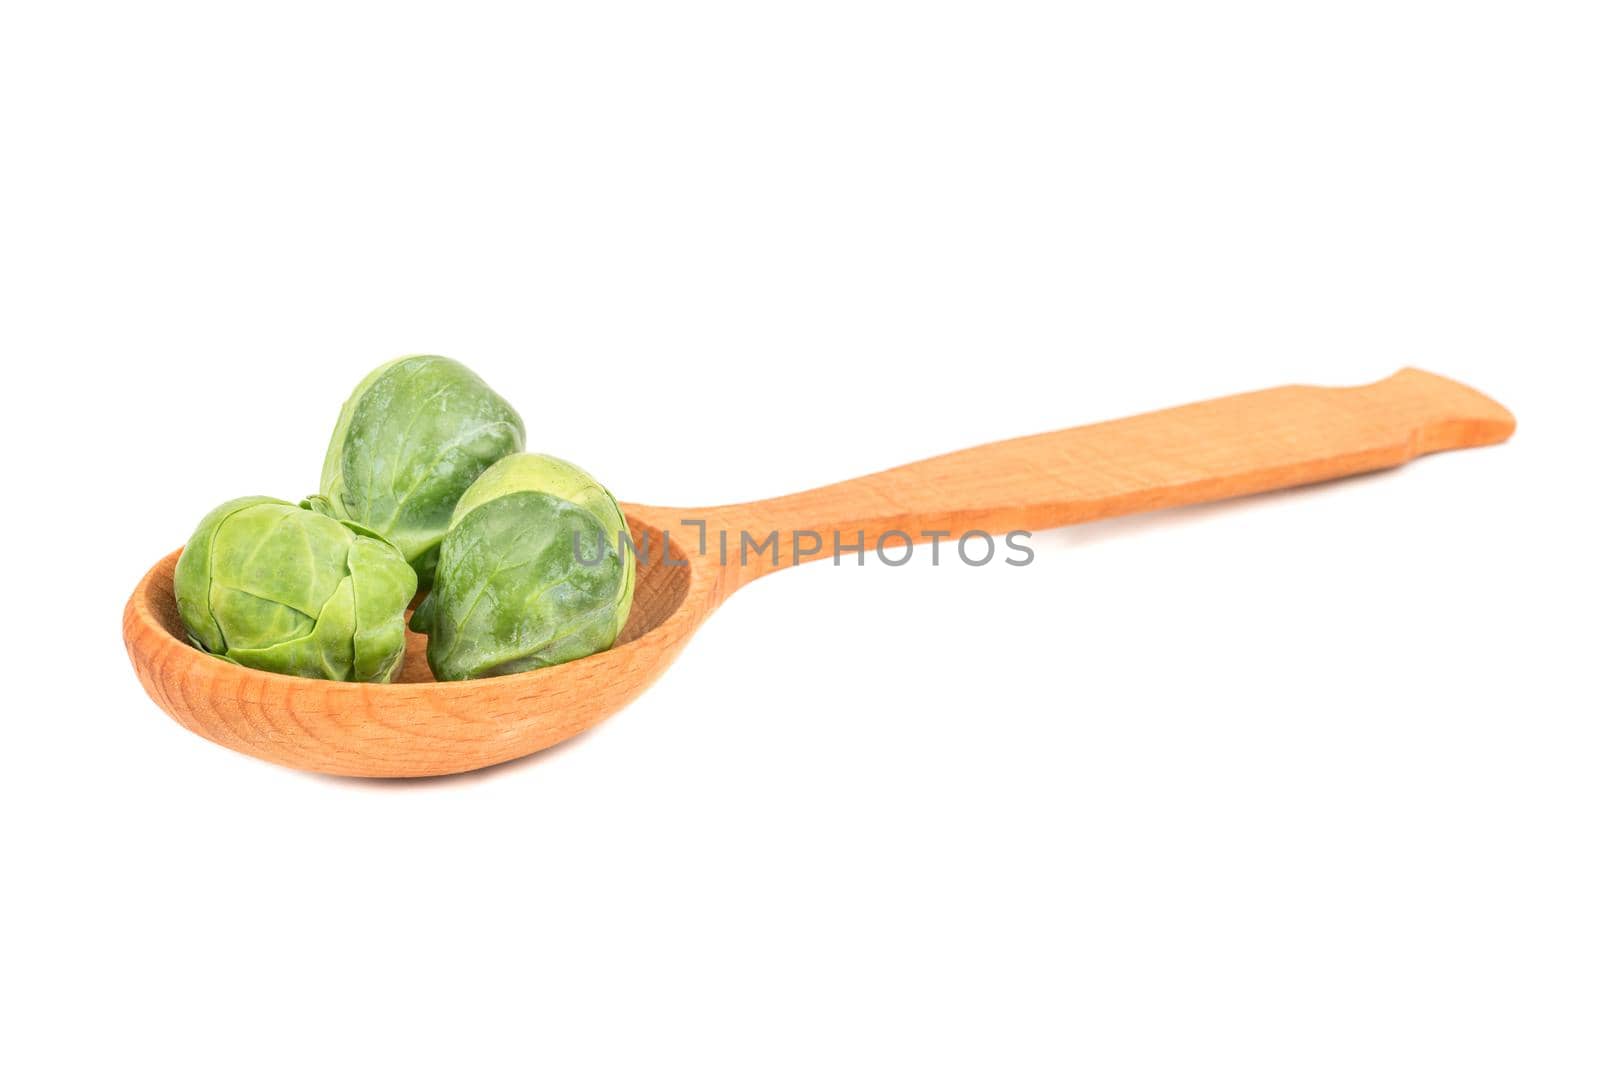 Fresh brussels sprouts in a wooden spoon on a white background